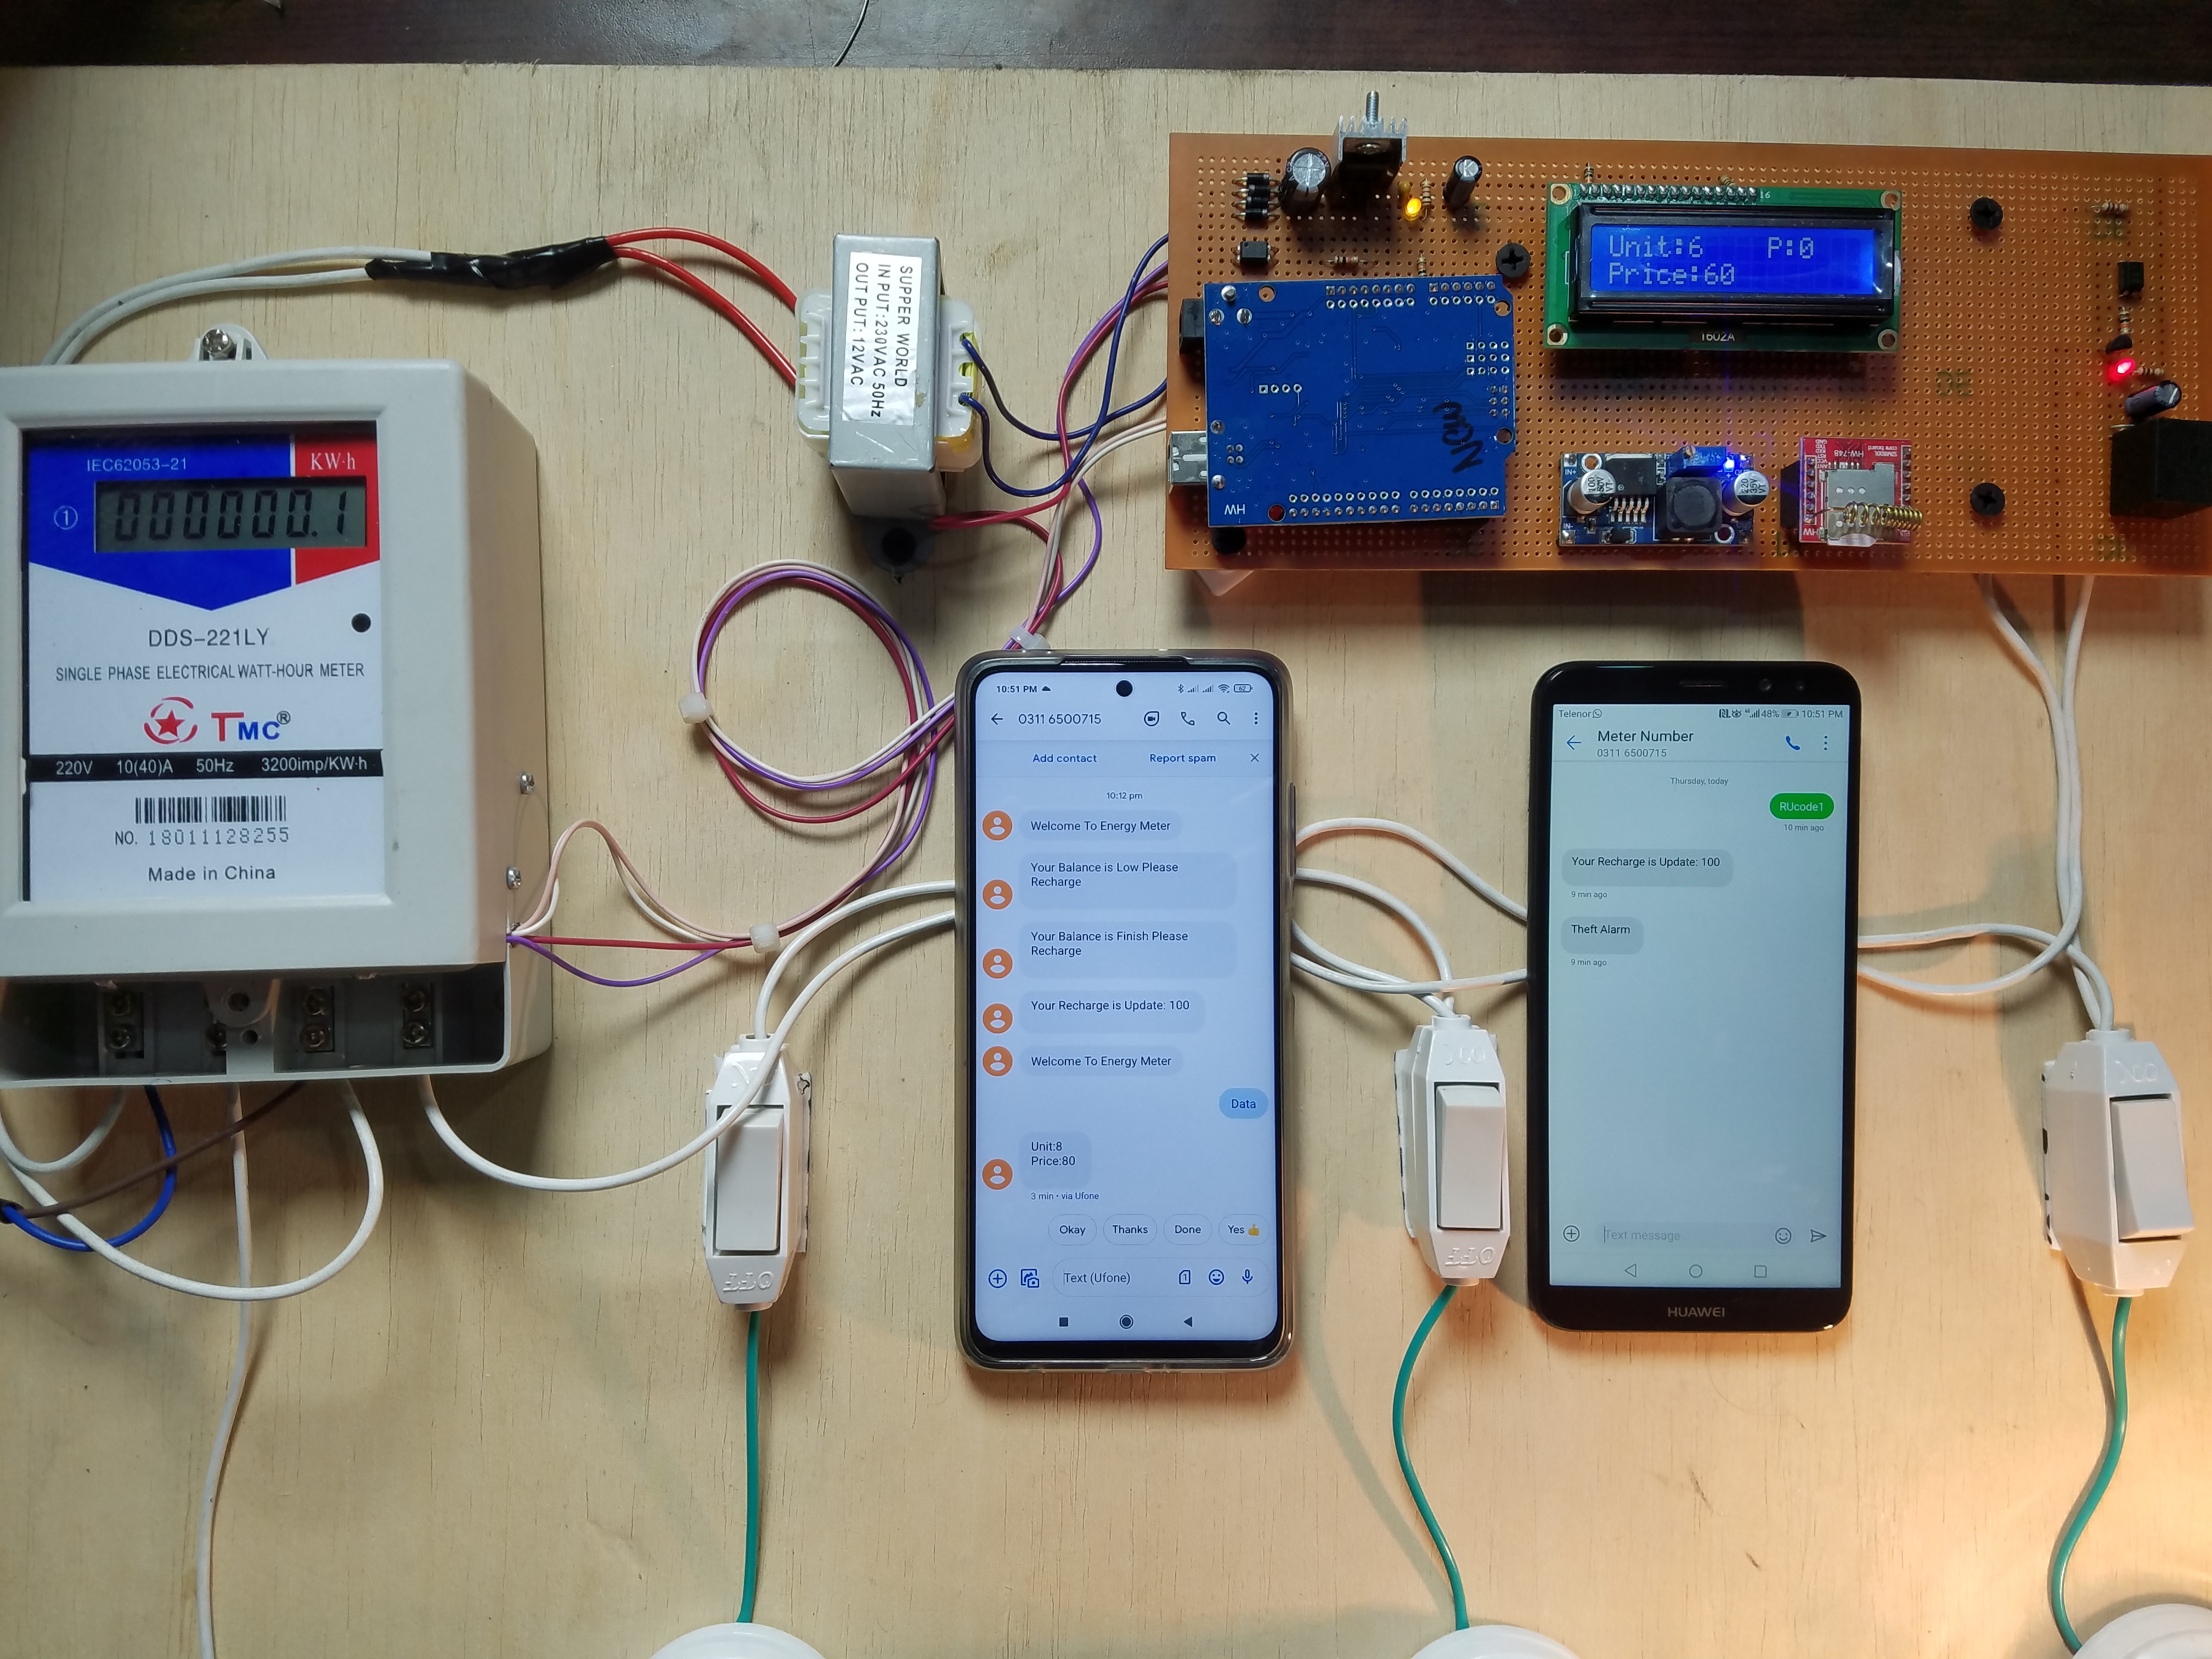 Iedereen Volharding Chemie Arduino and GSM based Prepaid Energy Meter with Theft Alert - Hackster.io